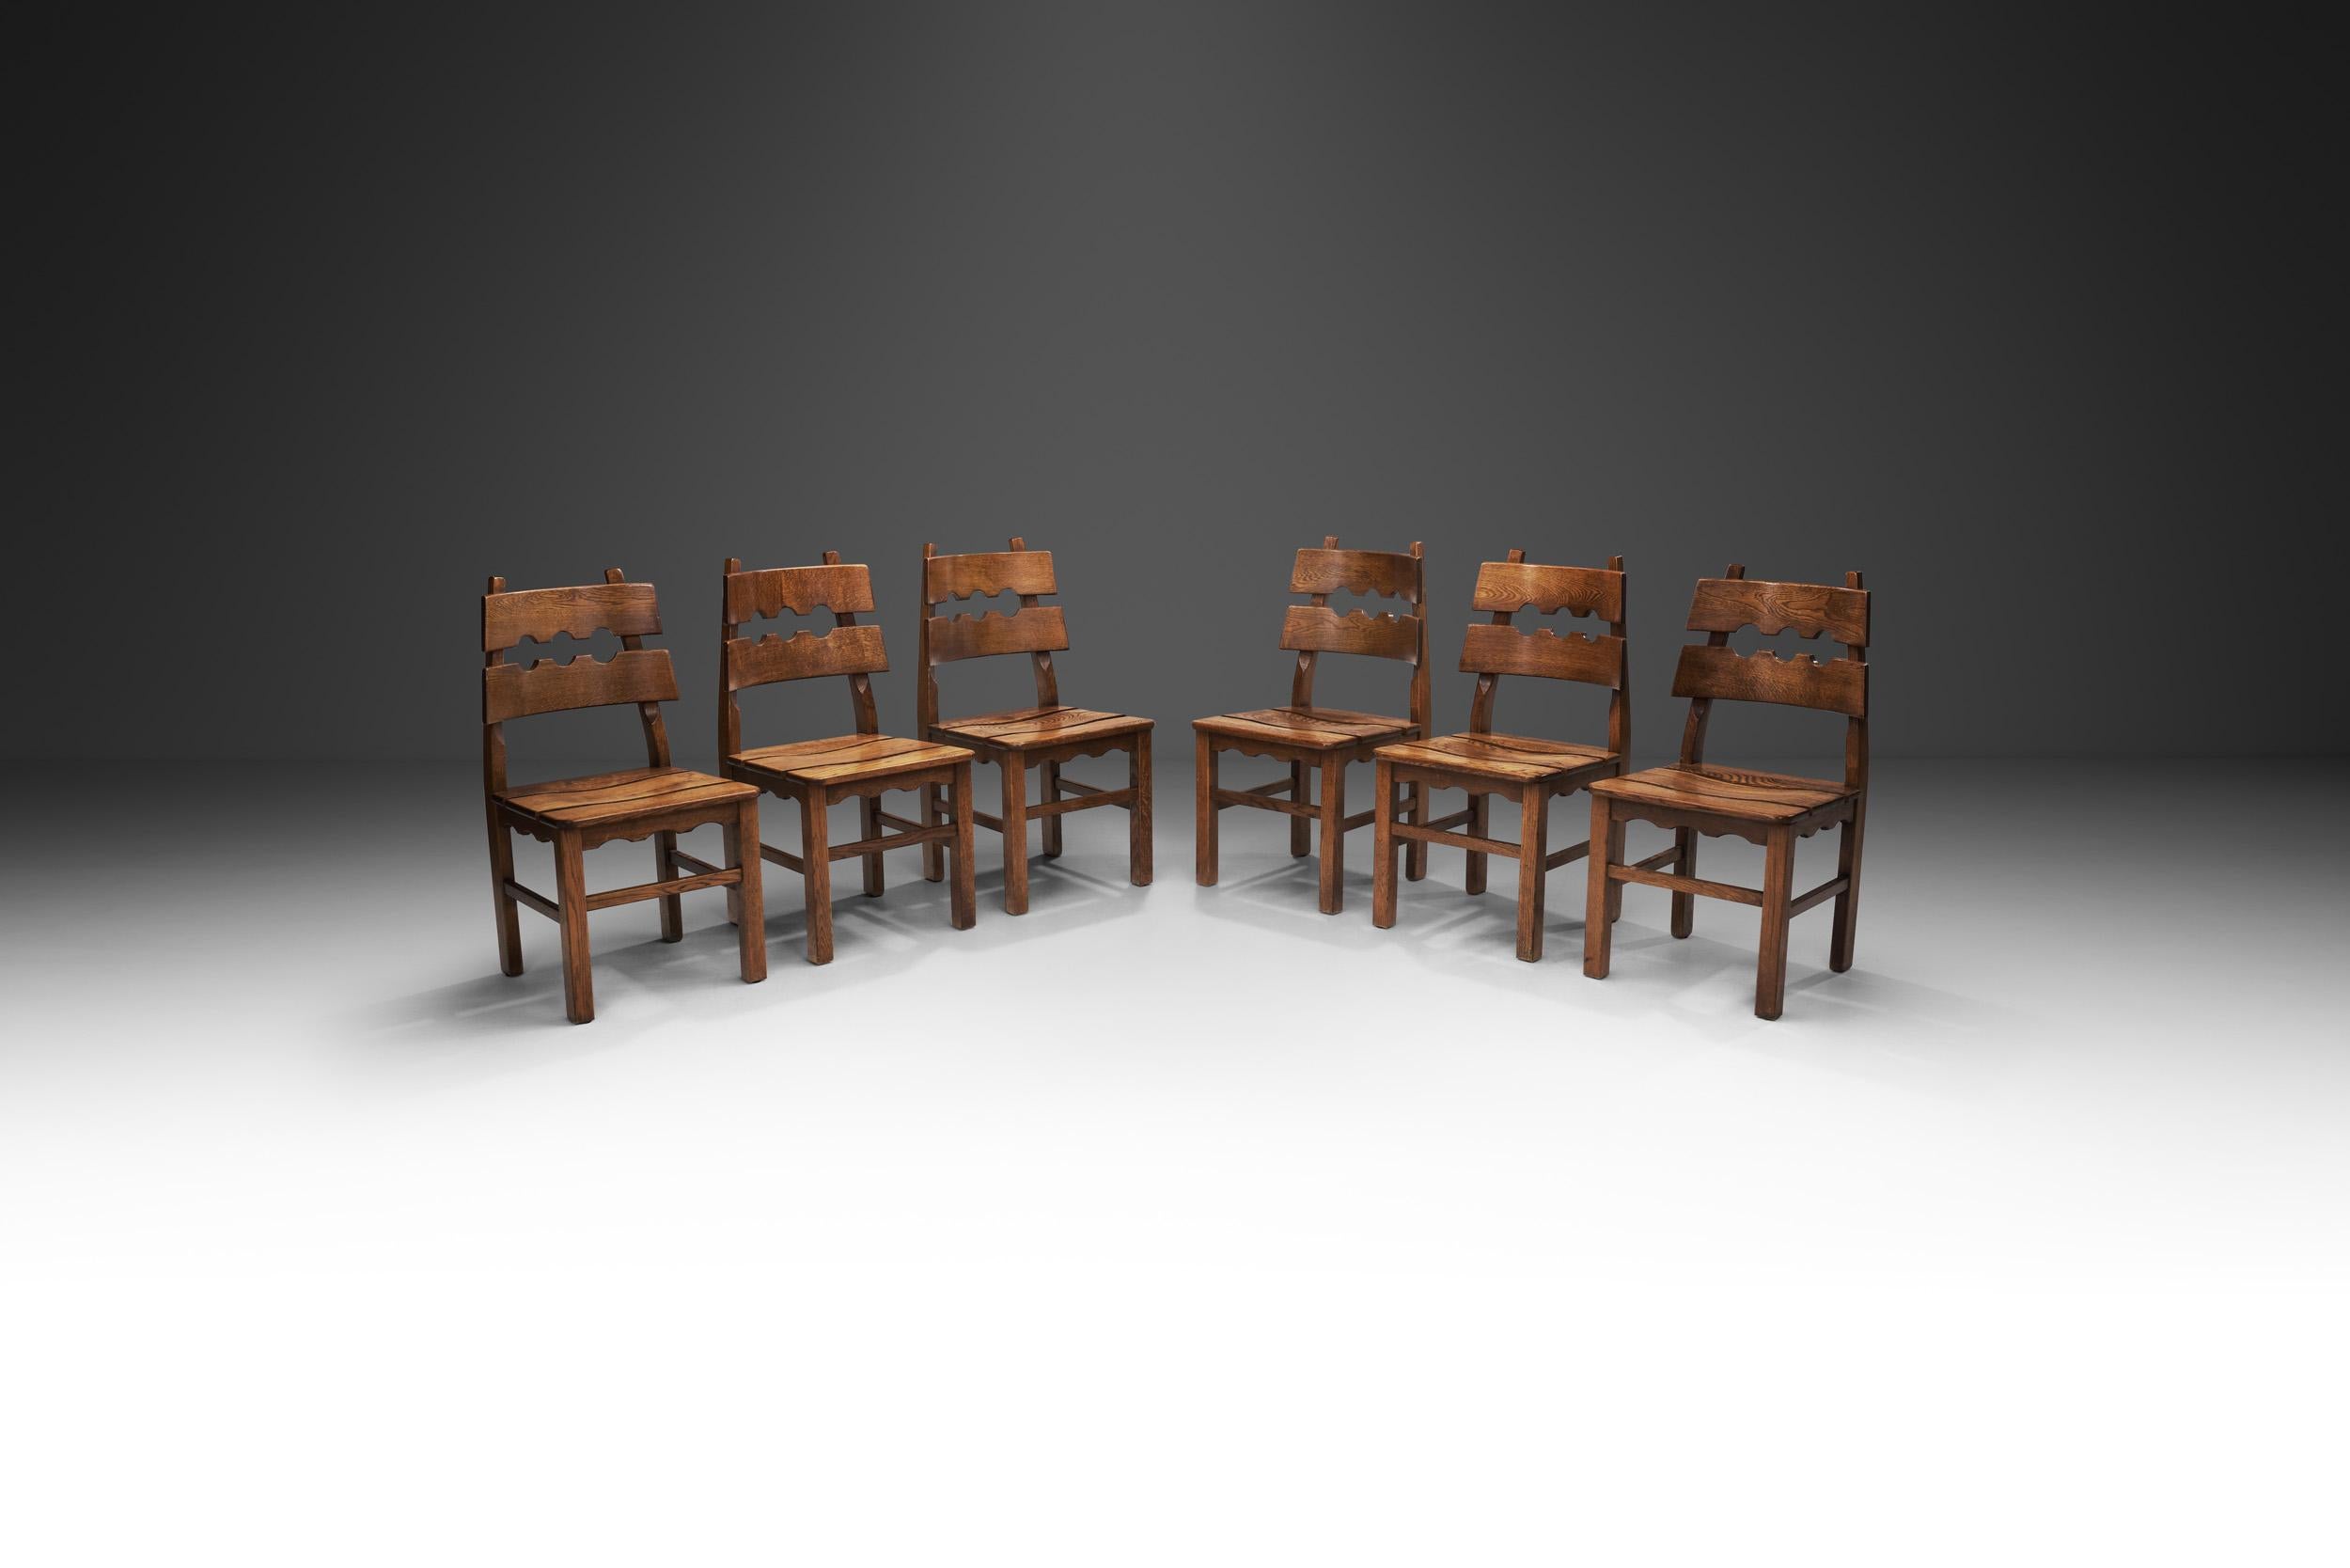 This rare set bears the unmistakeable oak structures created Danish designer and craftsman, Henning Kjaernulf with the distinctive “razorblade” backs. This set was manufactured by the Danish company, Nyrup Møbelfabrik during the 1970s and has an